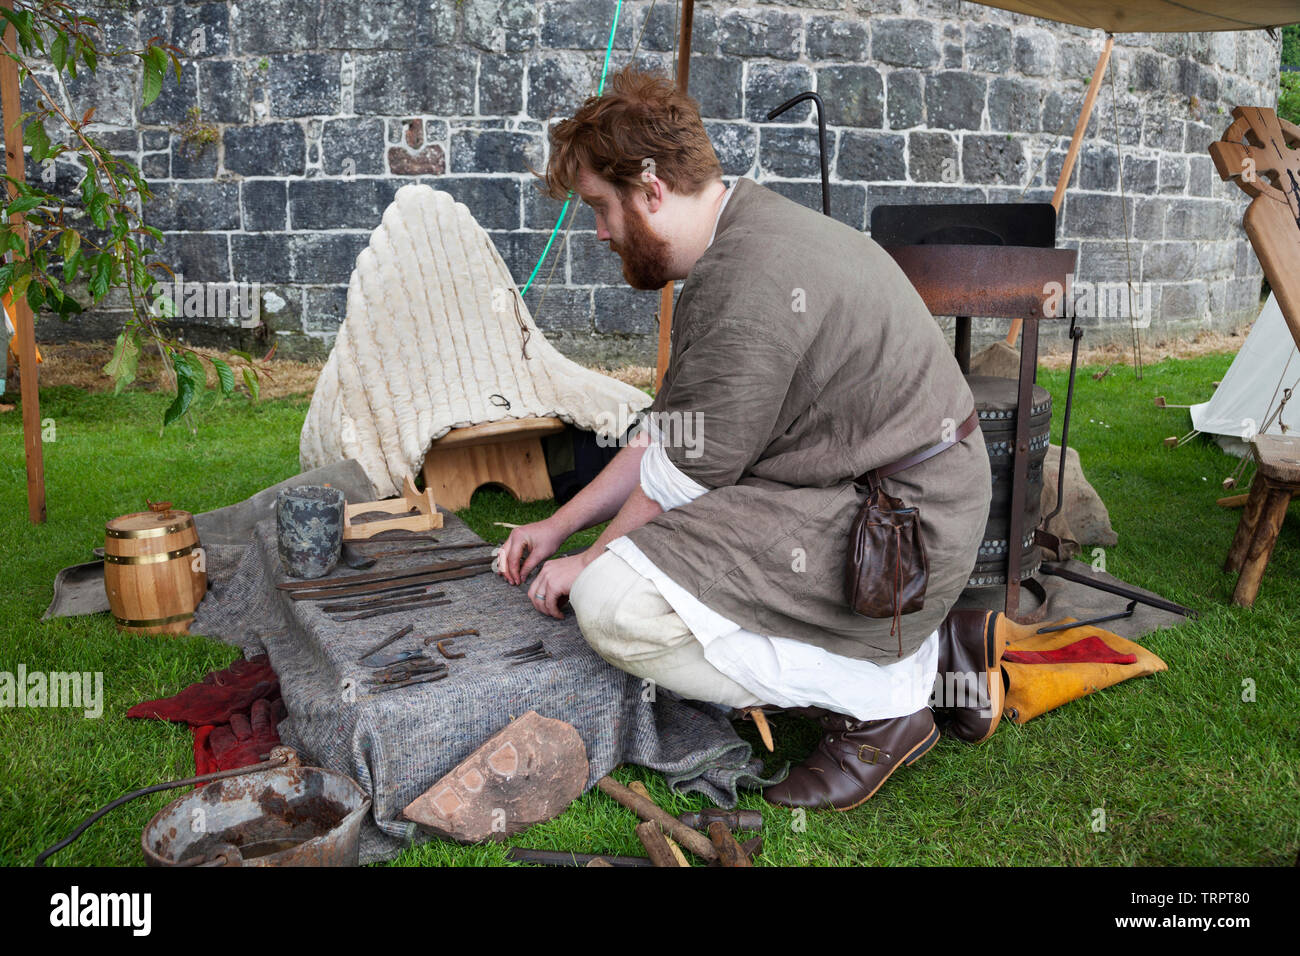 Reenactor of the early renaissance laying out metal working tools at the Rock of Ages festival, Dumbarton Castle, Scotland Stock Photo